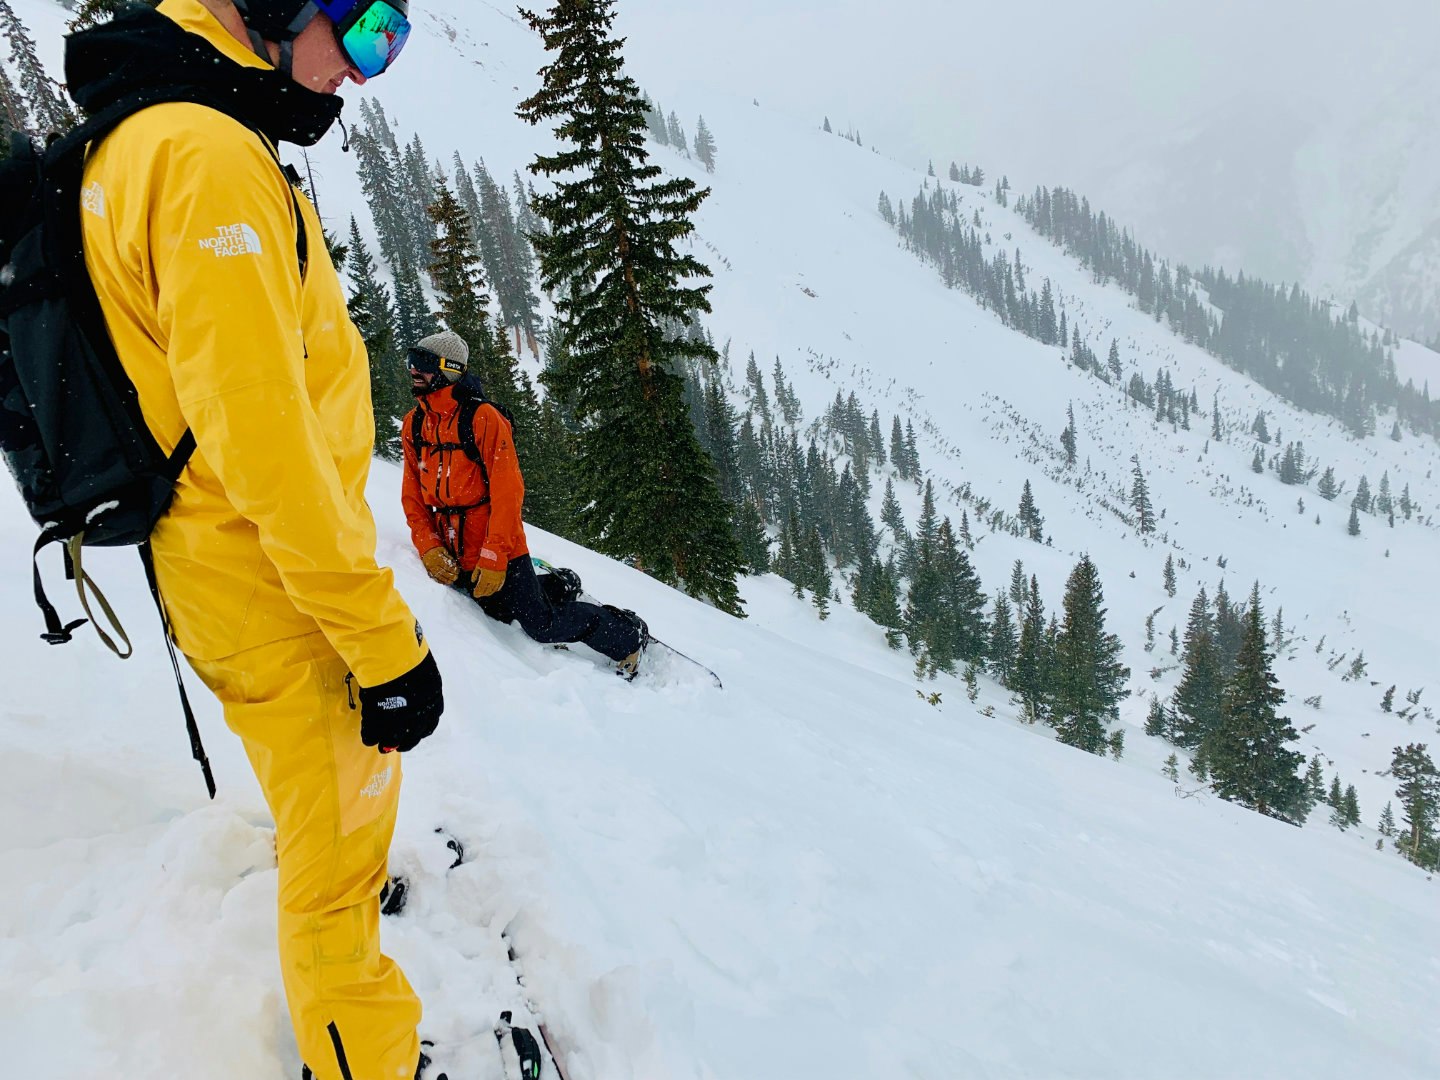 Two skiers peer down a steep slope in Aspen, Colorado with evergreen trees in the background. The skiiers wear bright yellow FutureLight pants and jackets by North Face, along with black backpacks, gloves, and goggles.